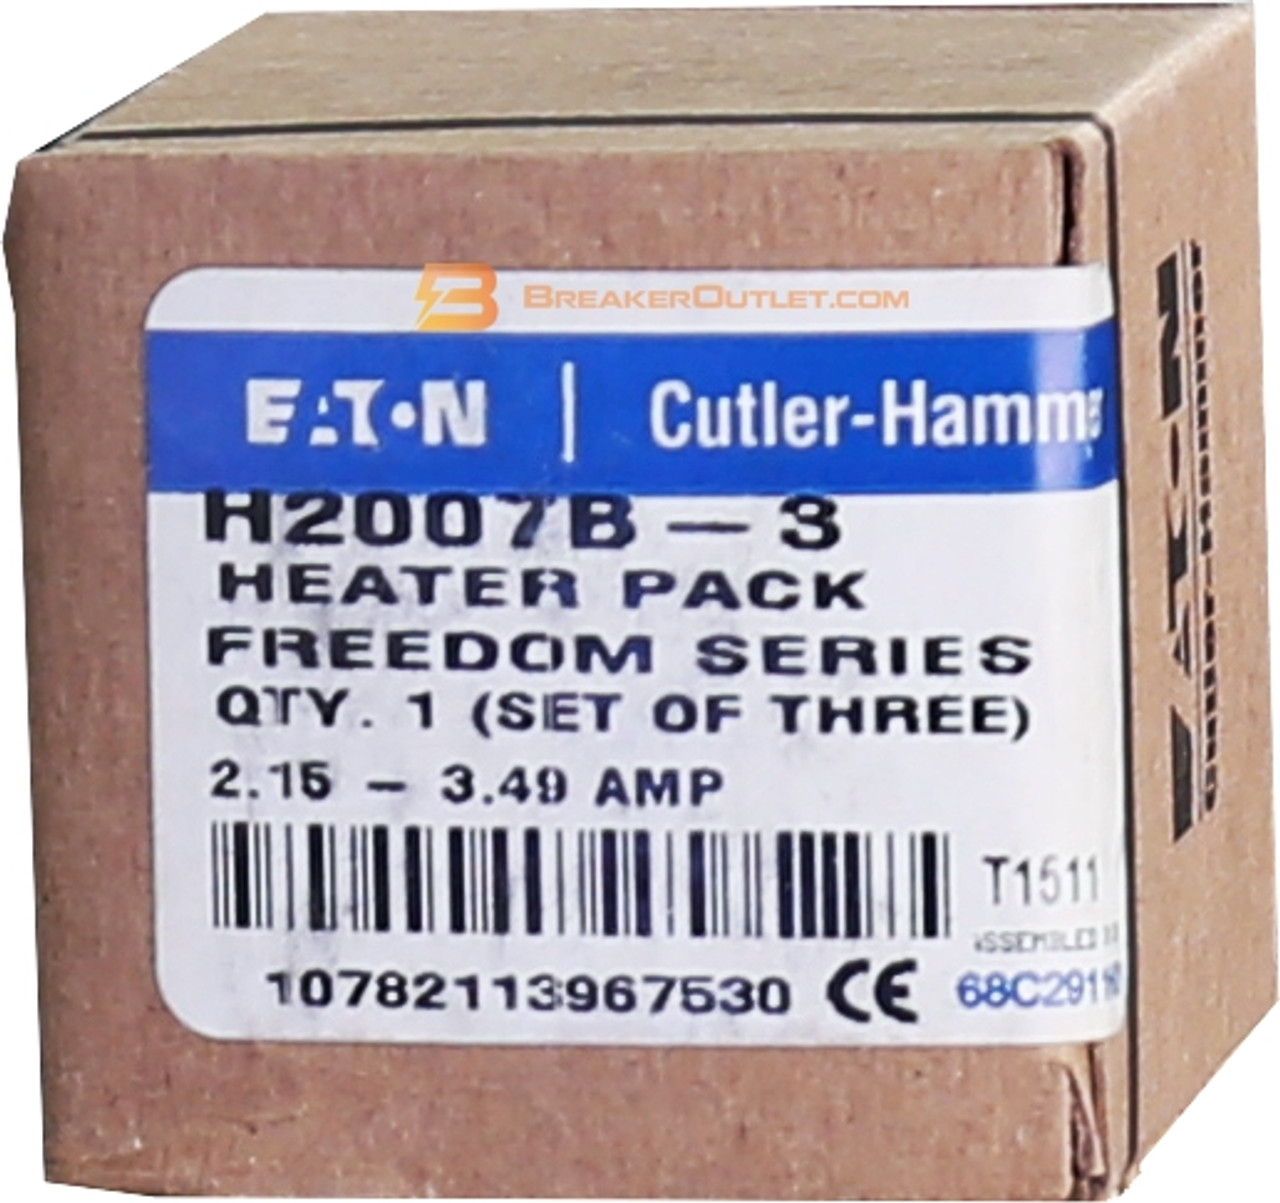 H2003B-3 Pack of 3
Freedom Series Heaters